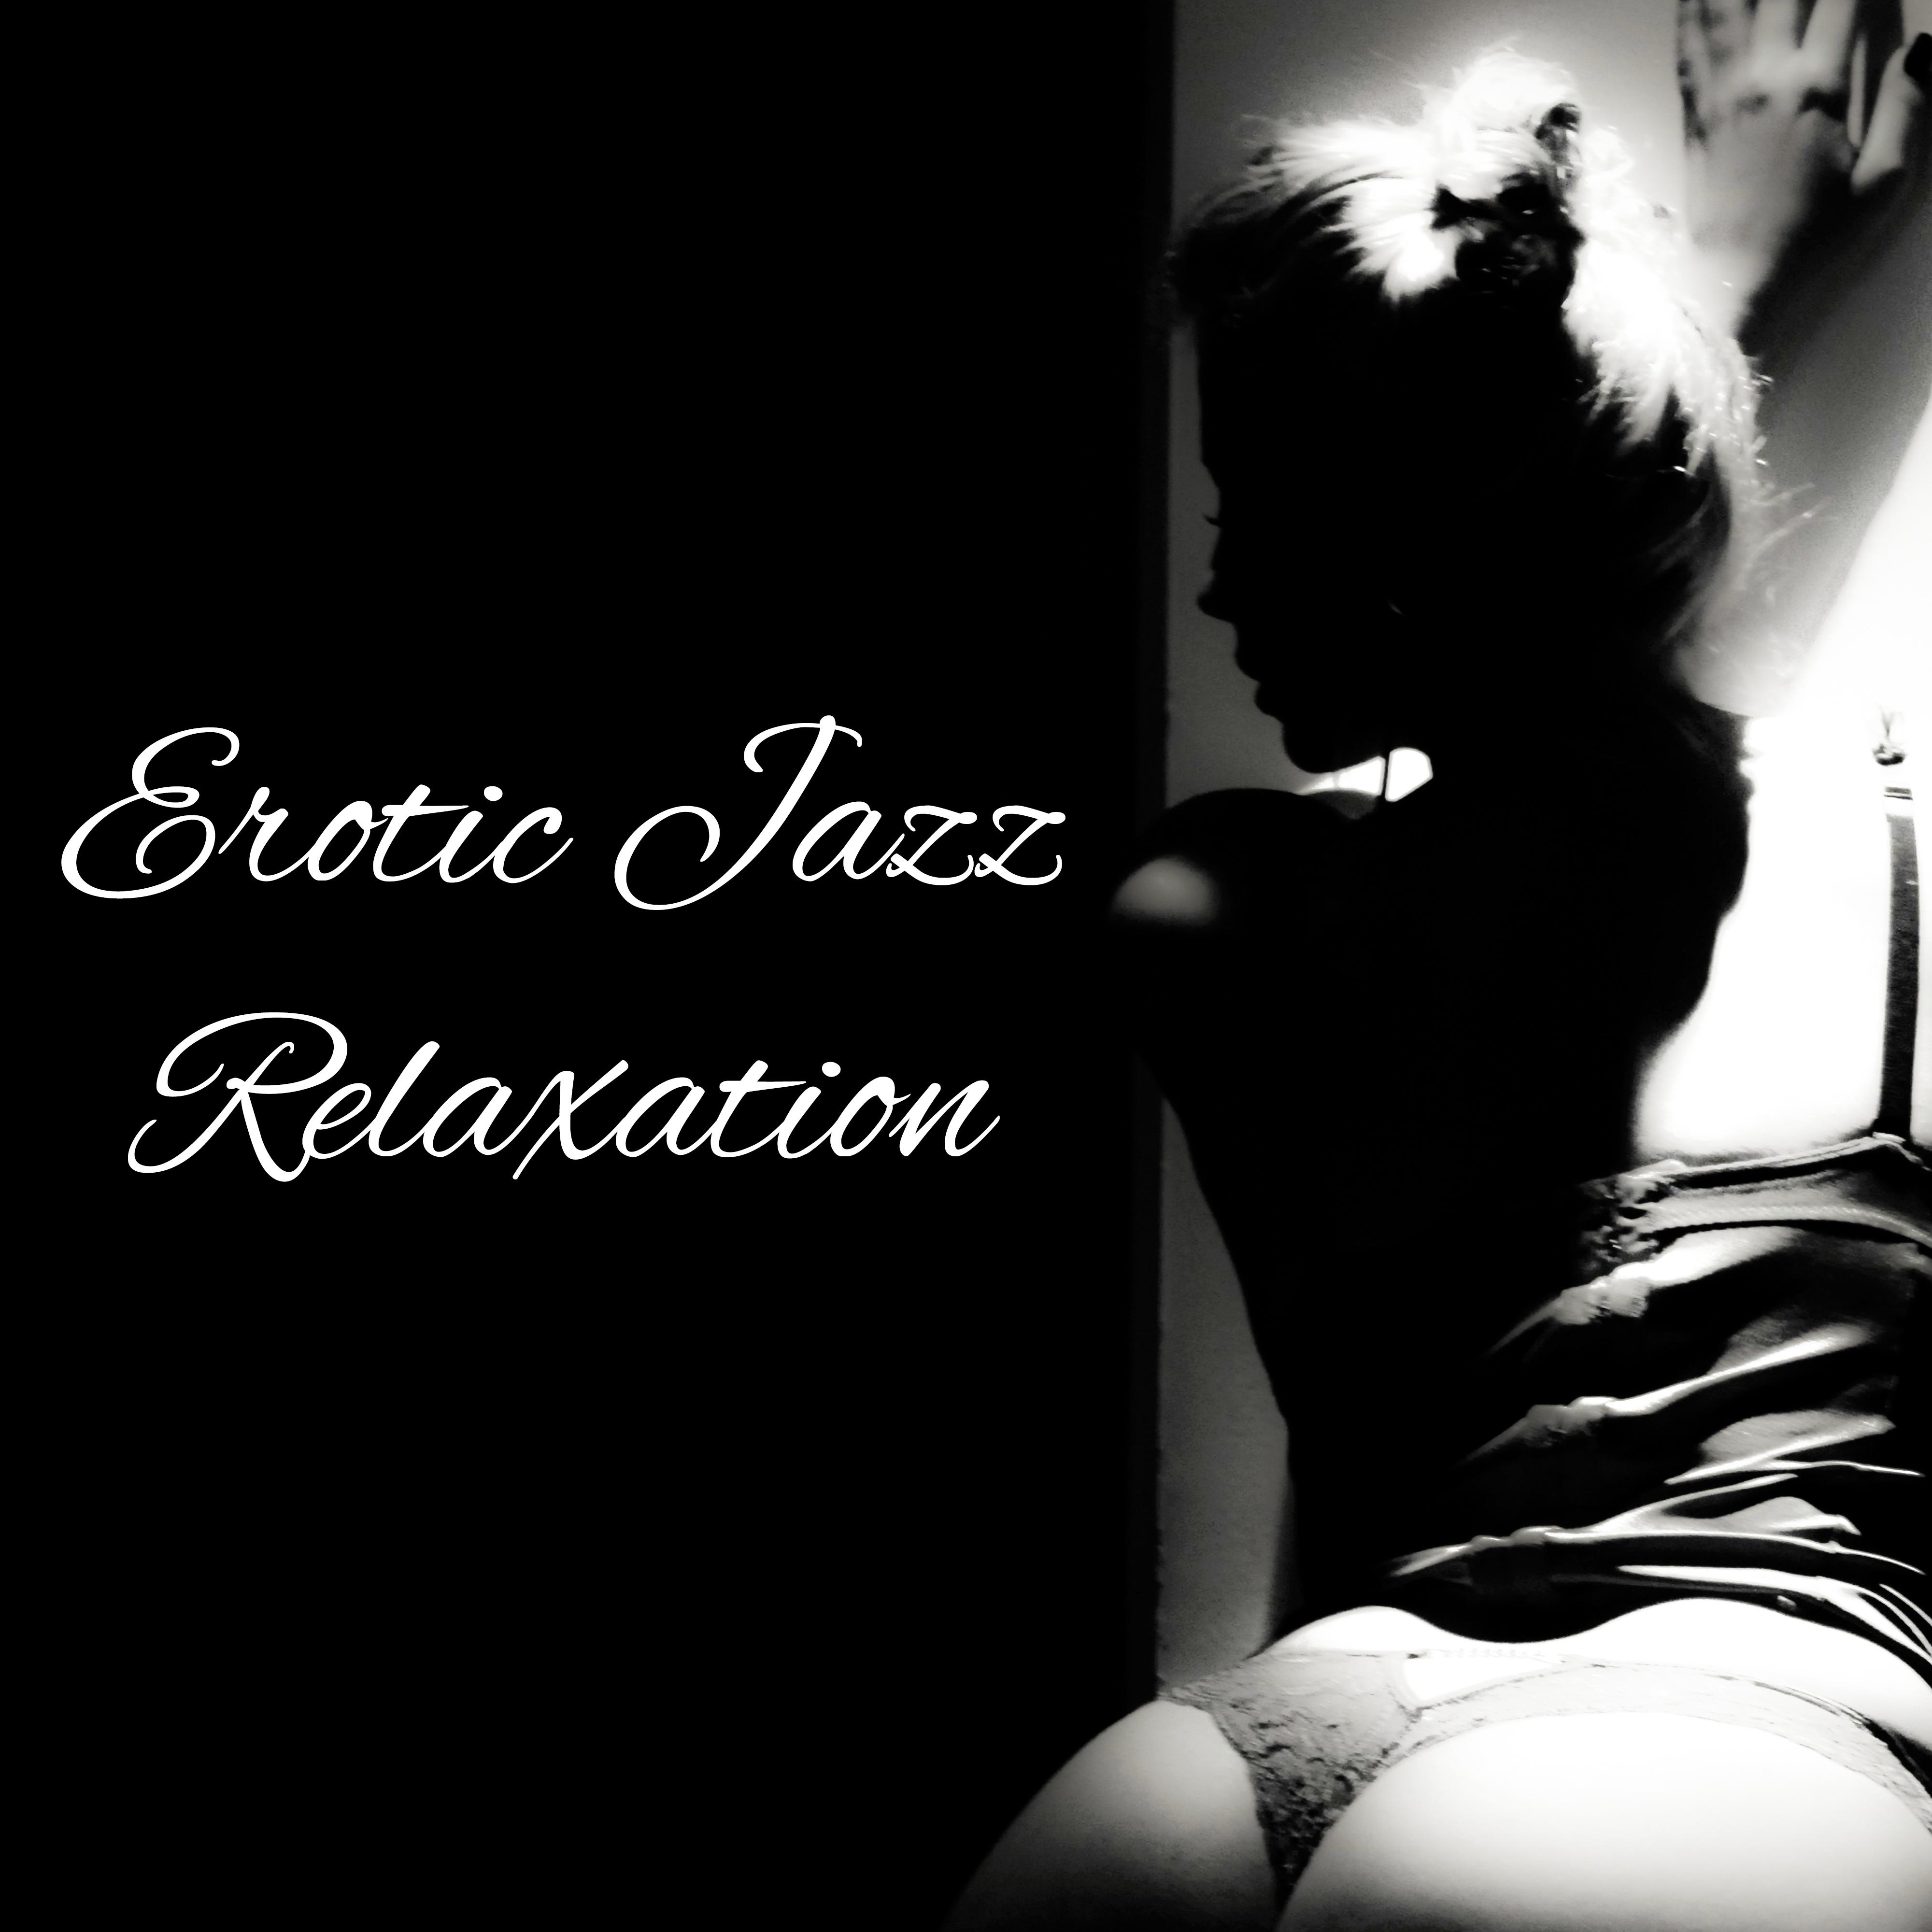 Erotic Jazz Relaxation  Sexy Jazz Lounge, Relaxed Chill, Sensual Melodies, Romantic Jazz 2017